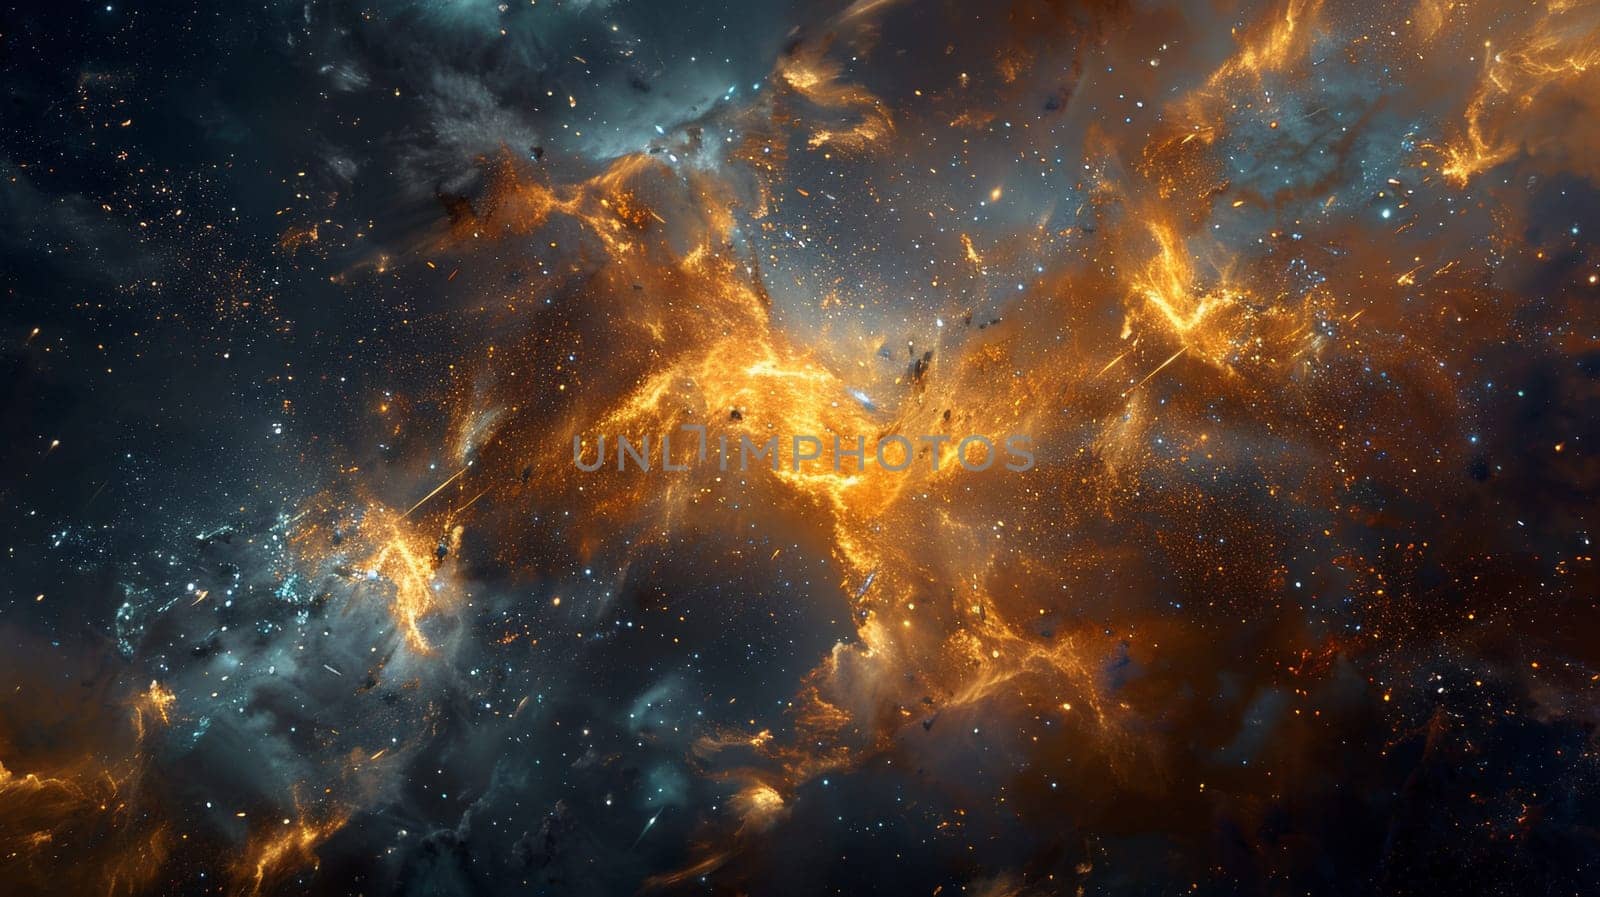 A close up of a space explosion with orange and blue flames, AI by starush